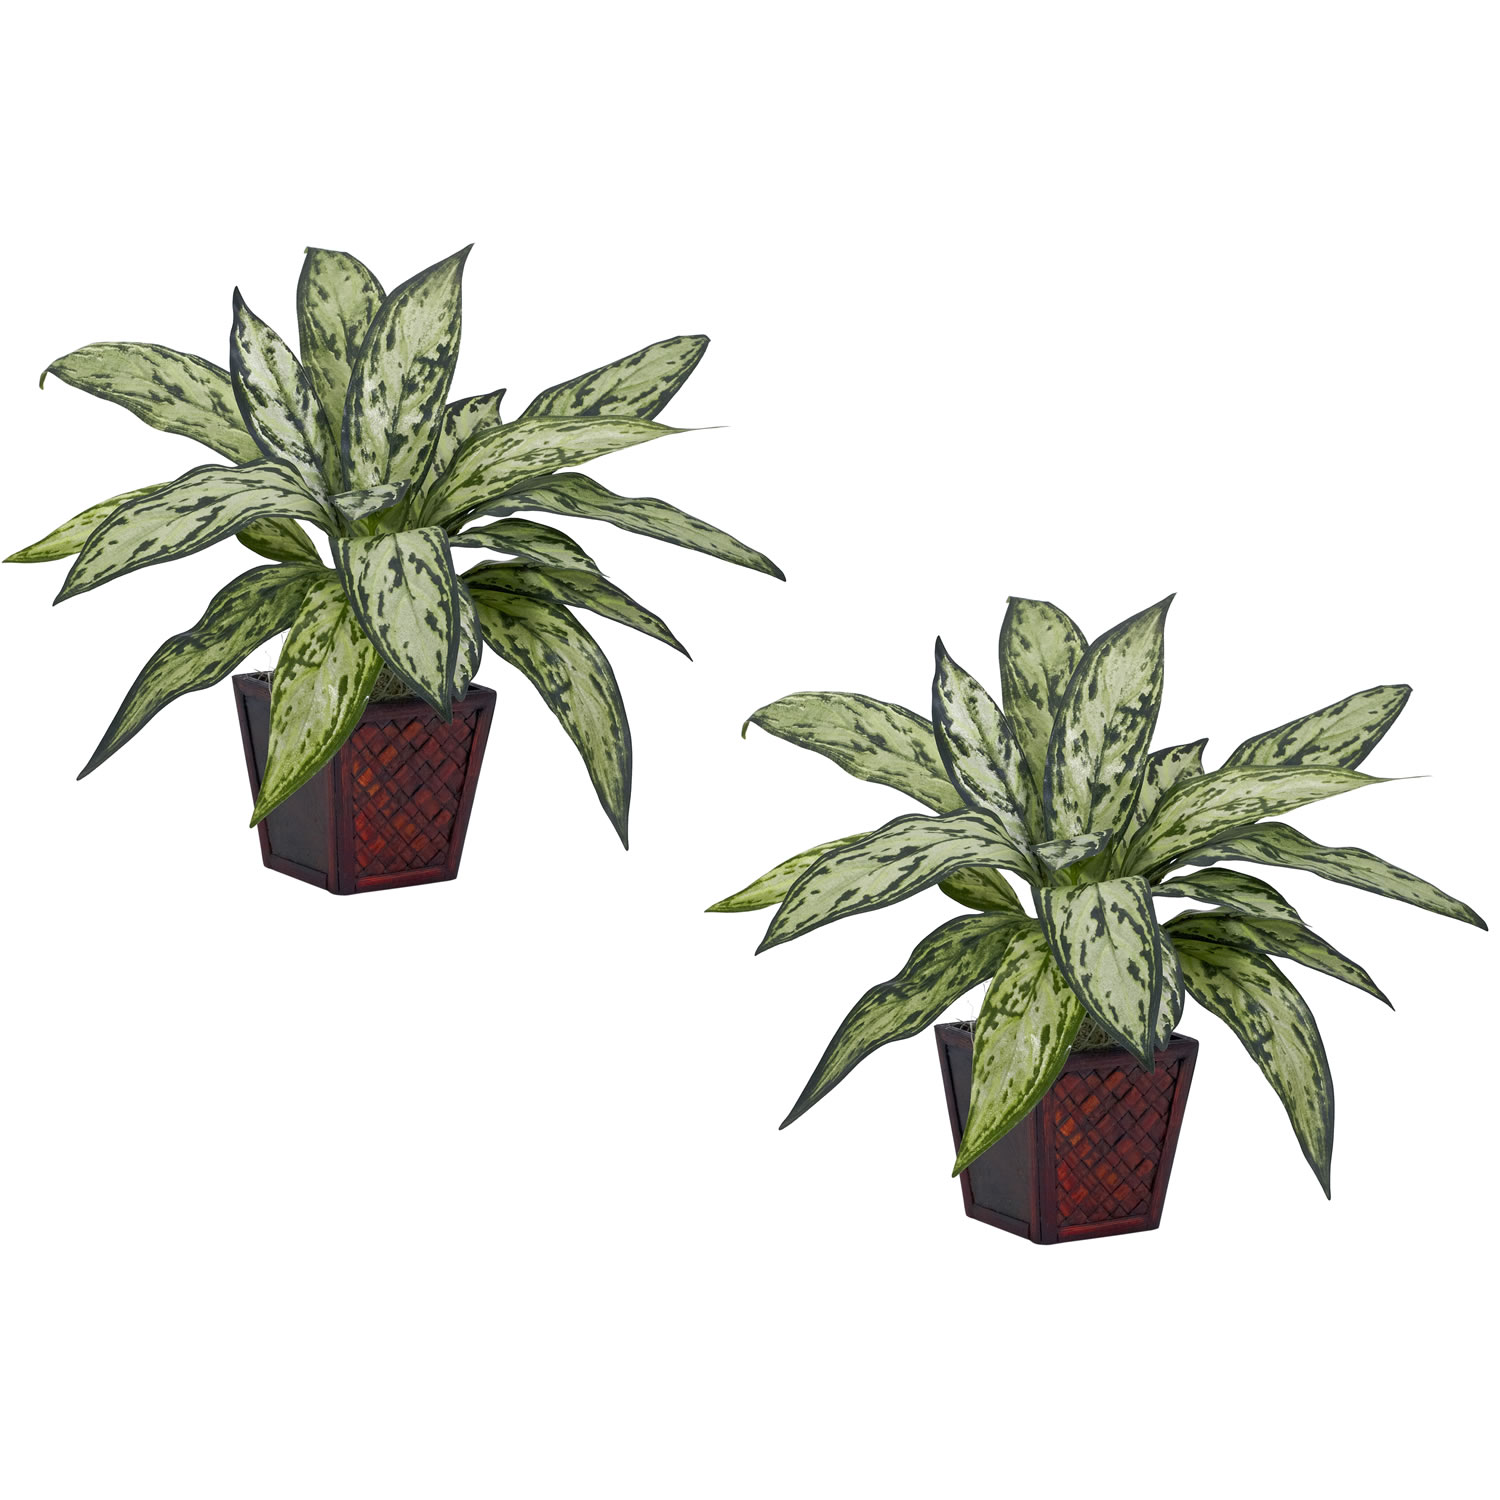 12 Inch Silver Queen In Decorative Planter (set Of 2)